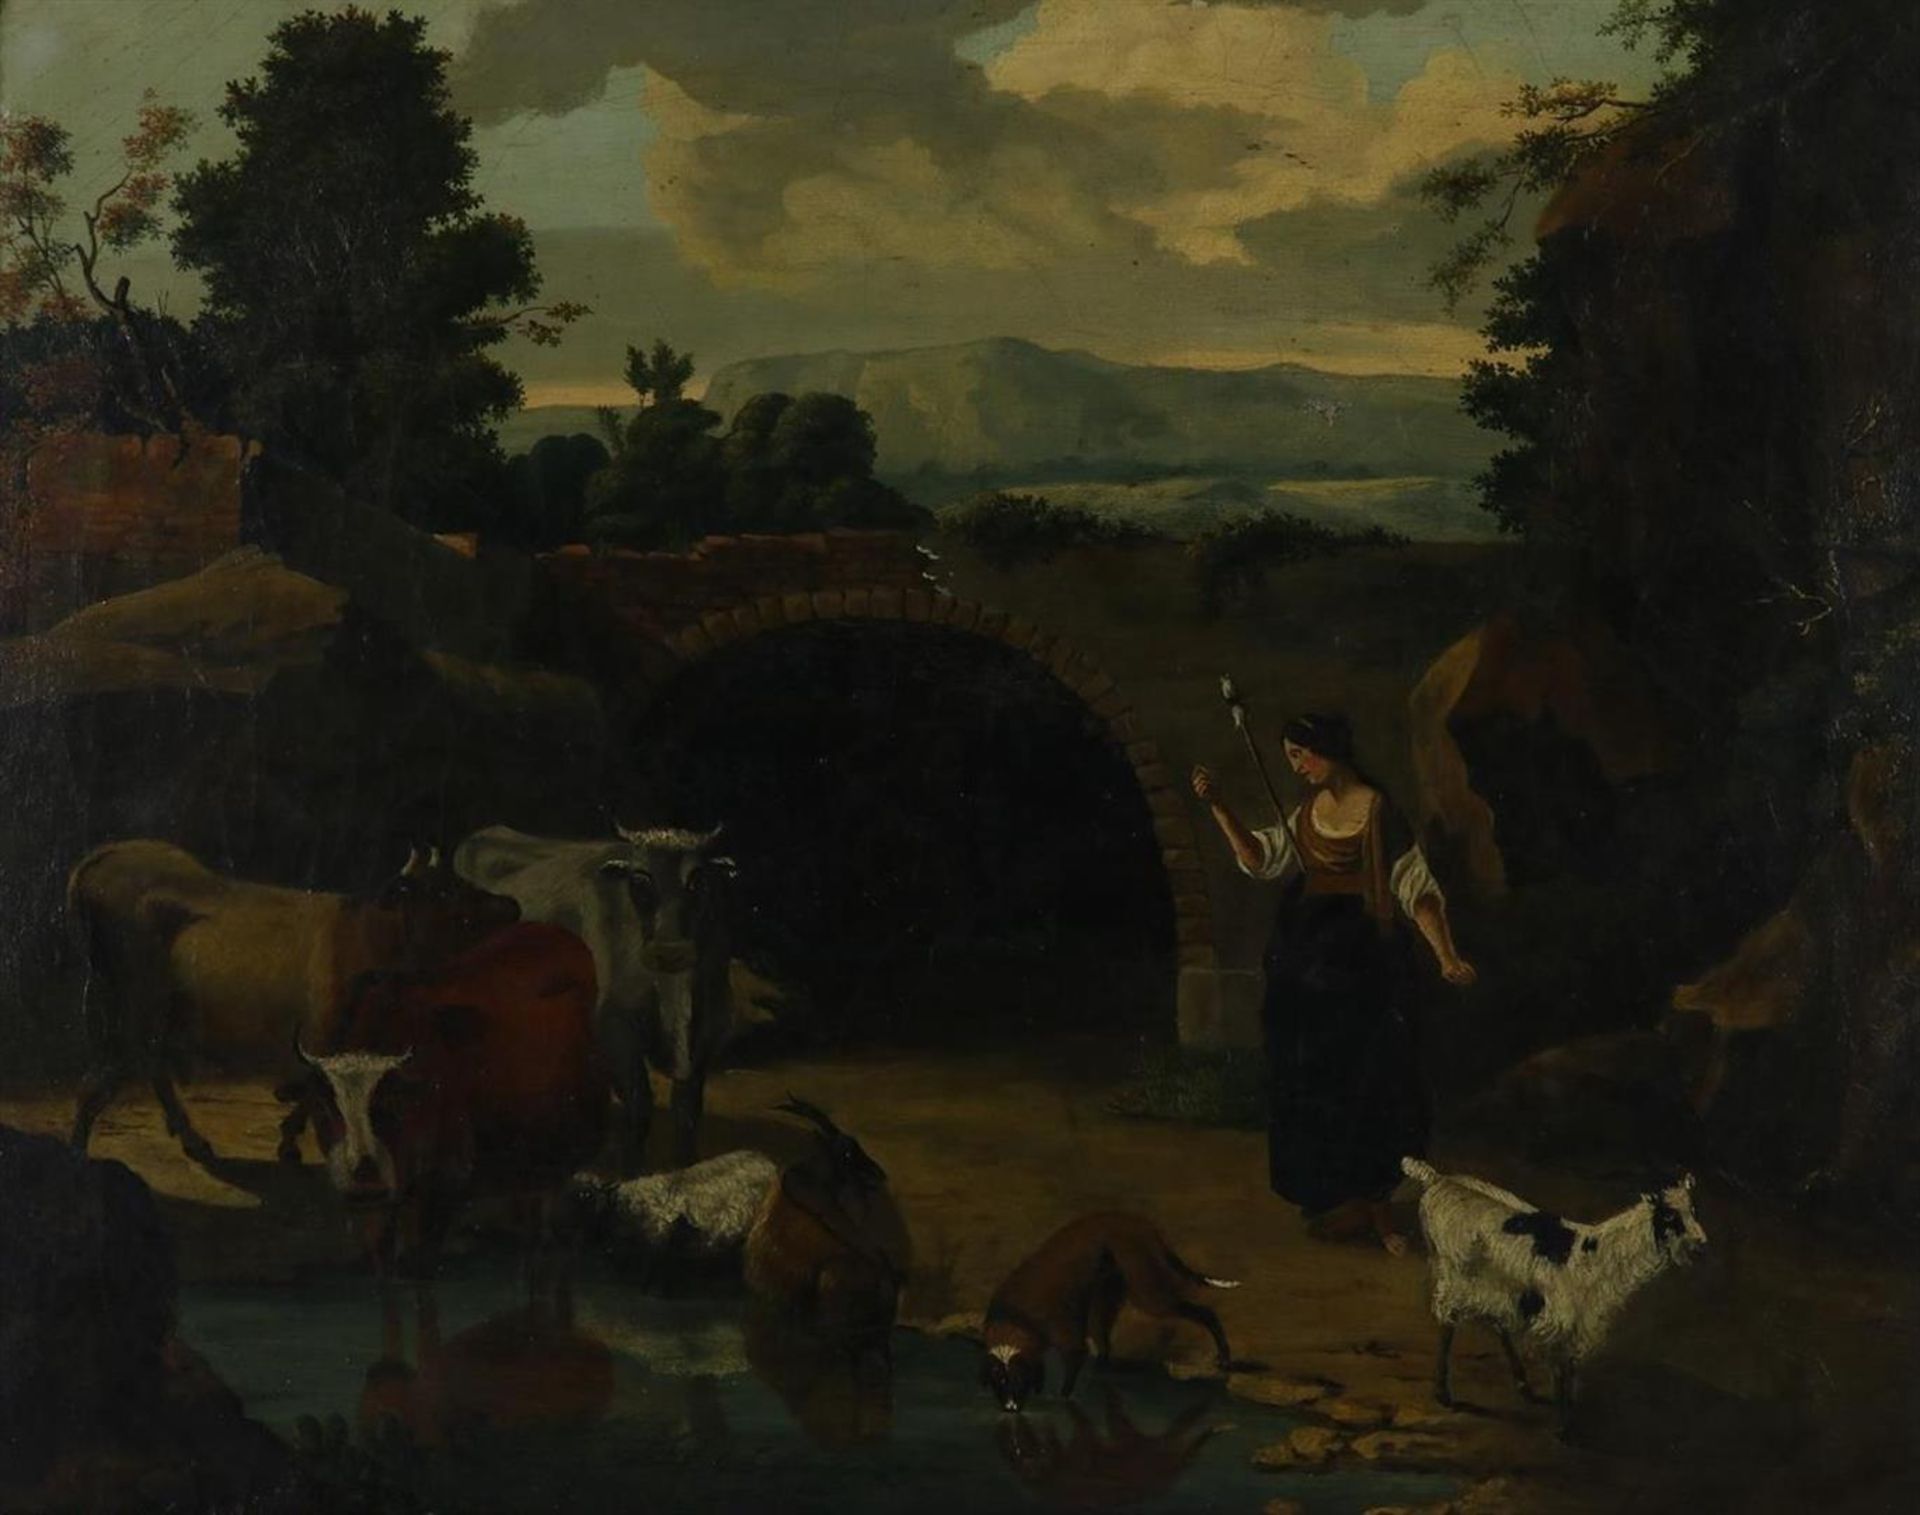 Italianizing landscape, shepherdess with cattle, unsigned, probably 18th century, oil on canvas,